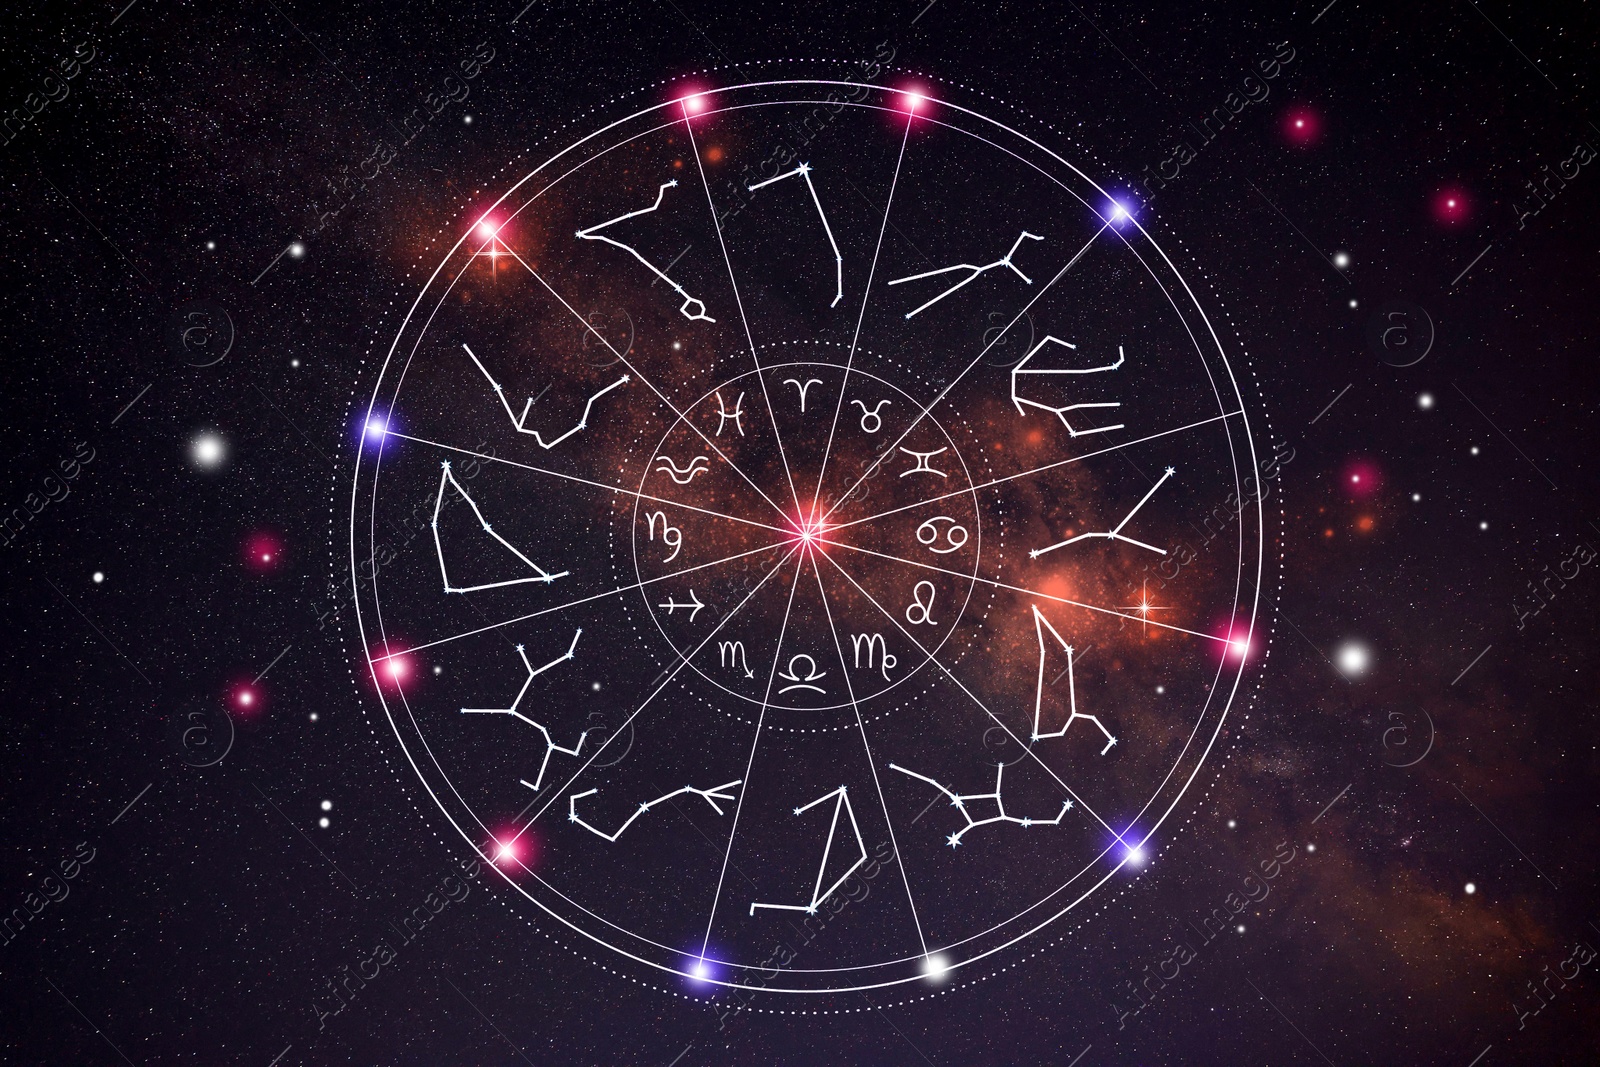 Image of Zodiac wheel with symbols and constellation stick figure patterns against space